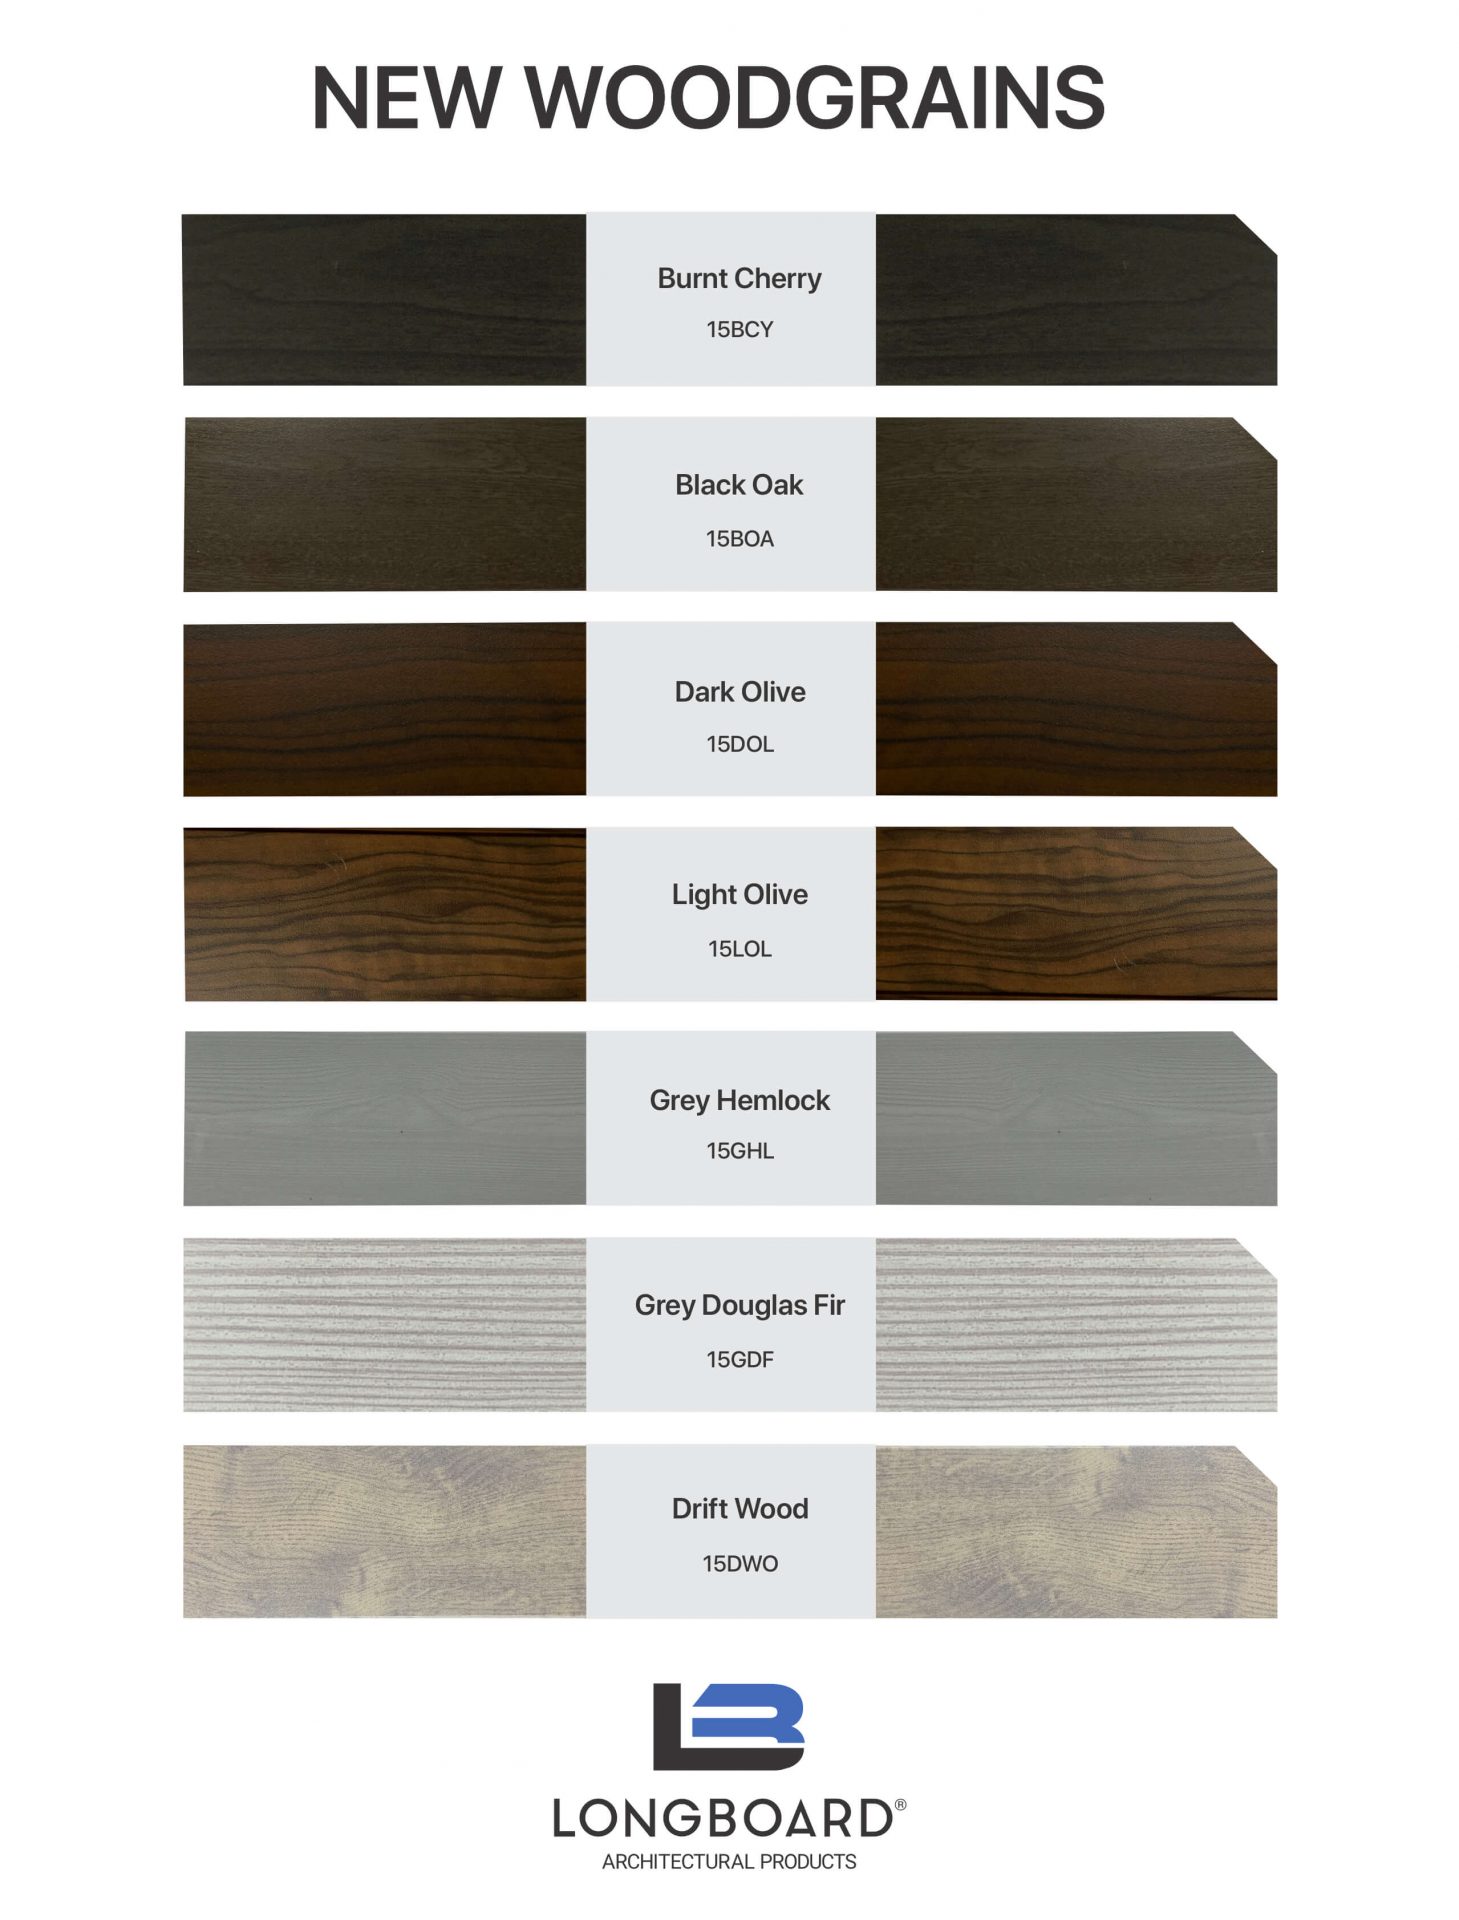 Graphic showing seven new woodgrain finishes in darker tones with product name and number and company logo